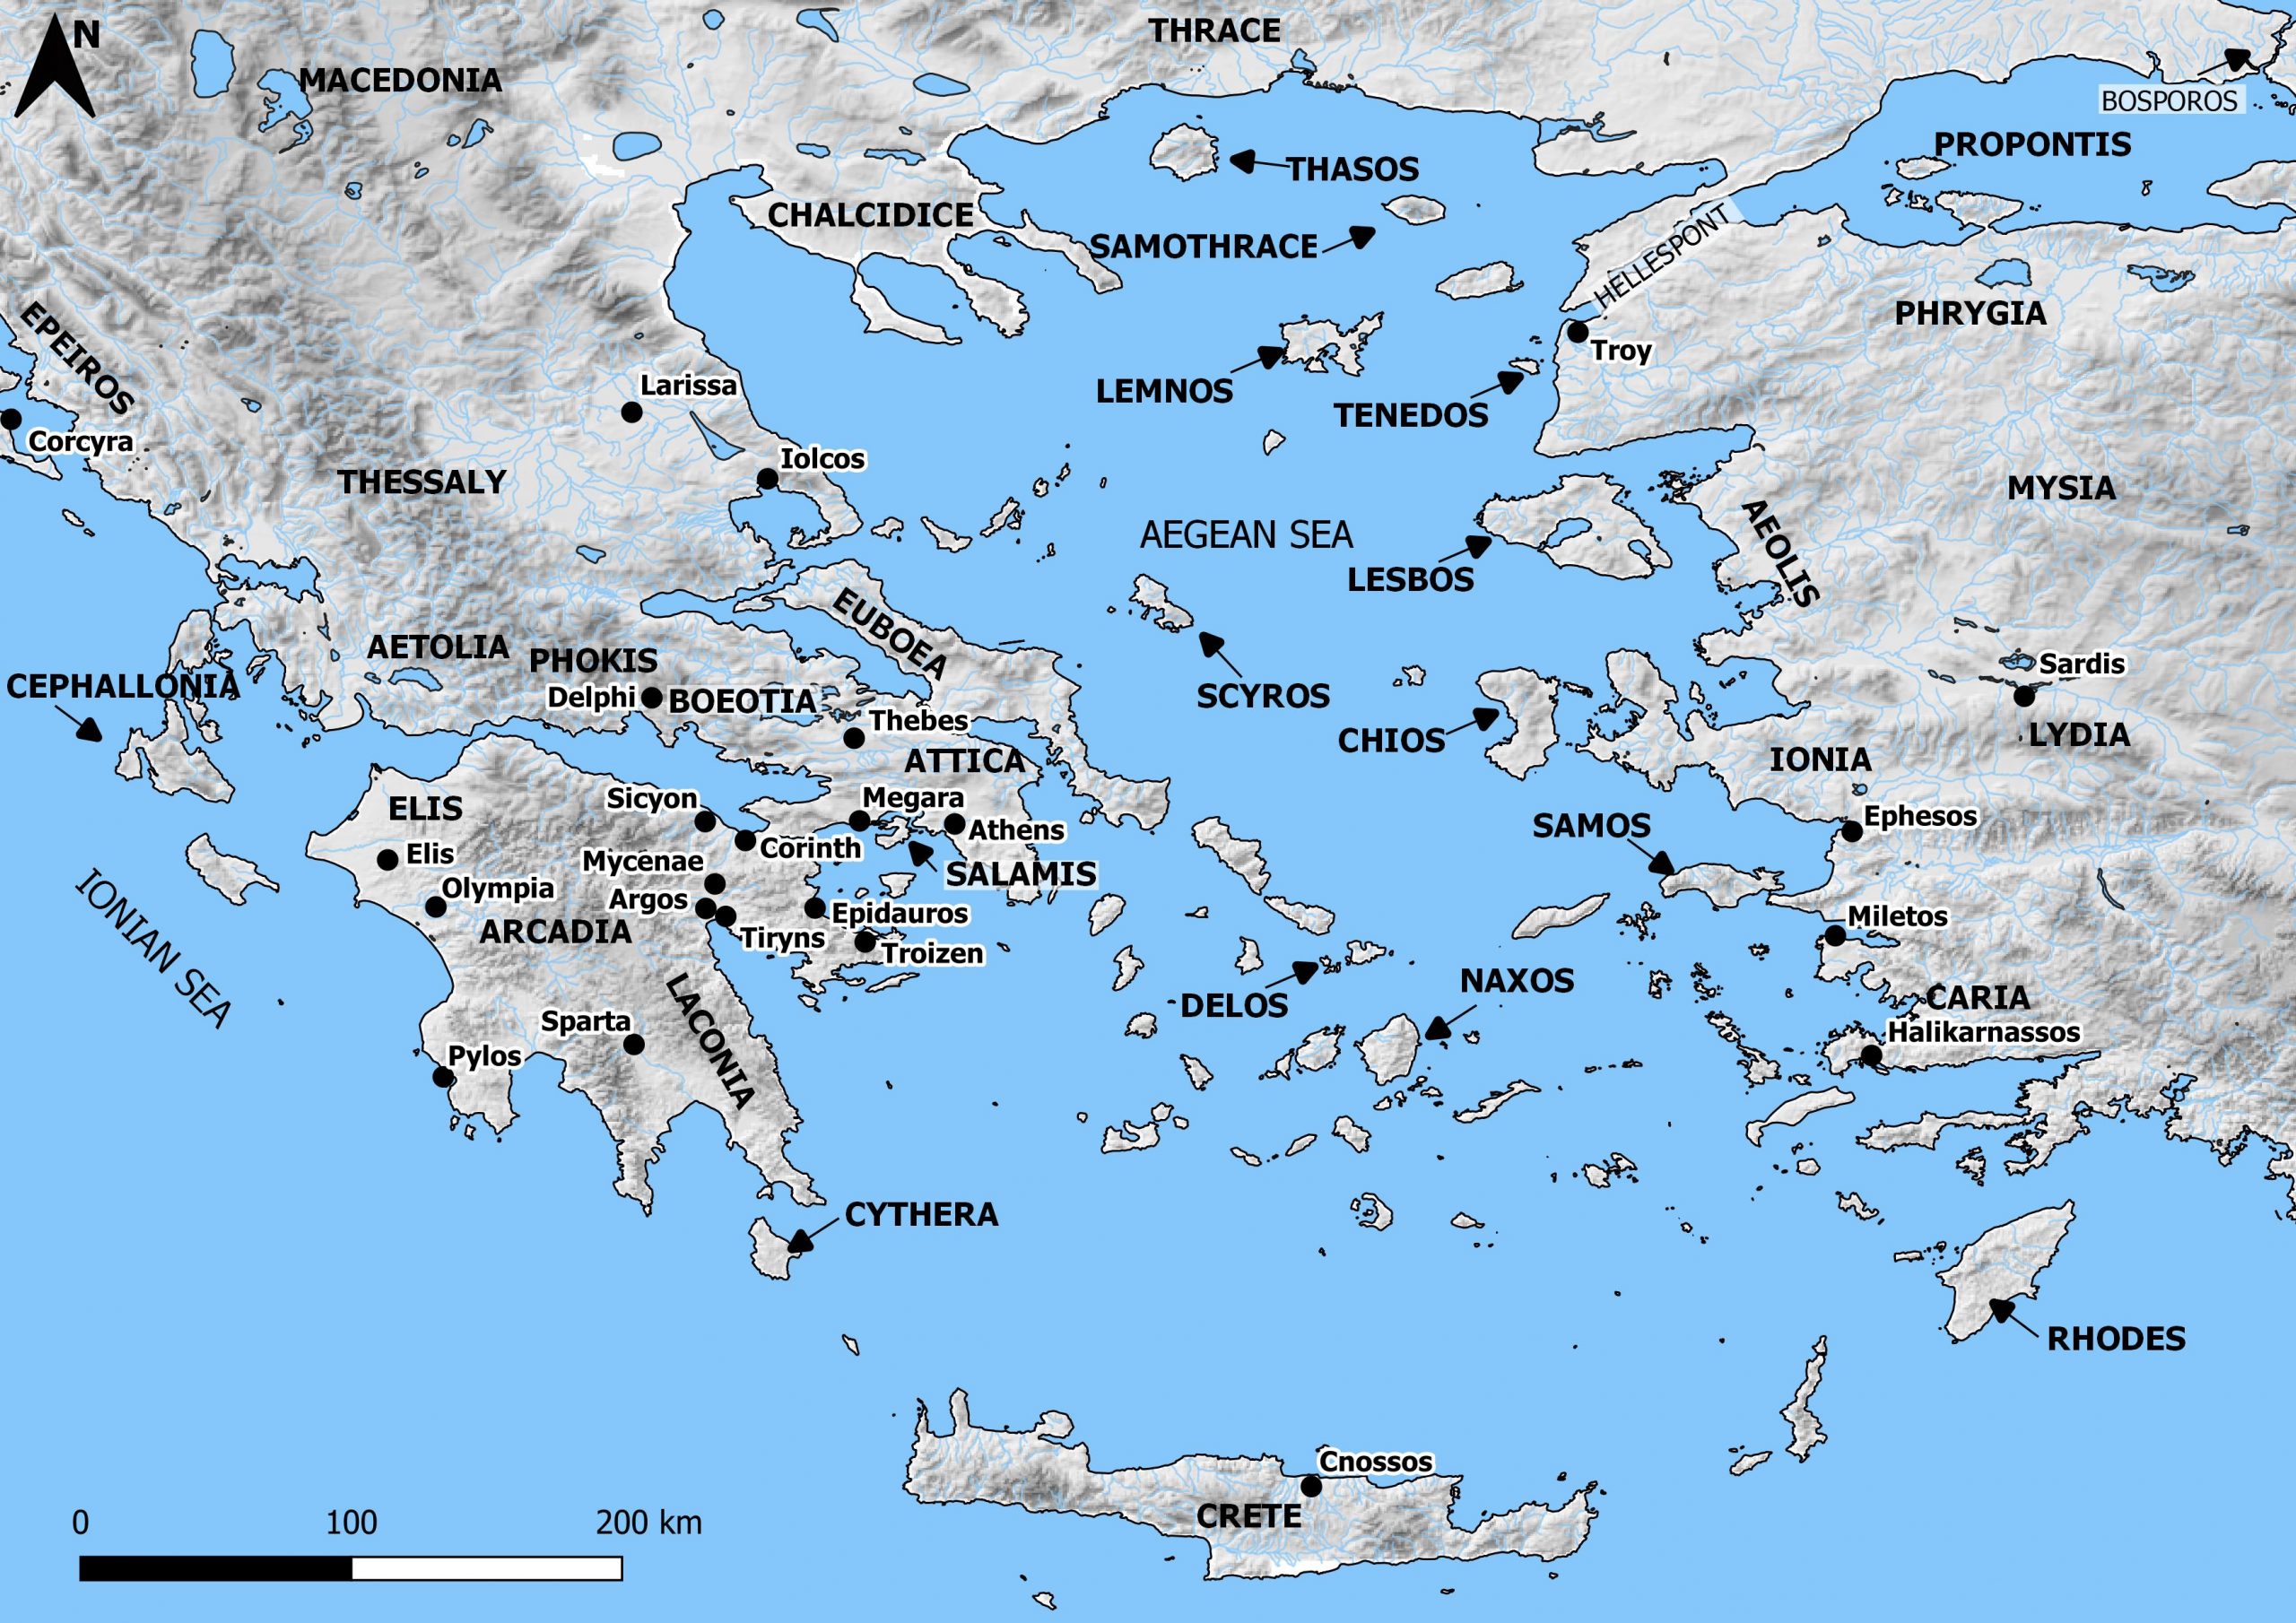 A map of the area around the Aegean sea, including mainland Greece, Crete, and western Turkey.